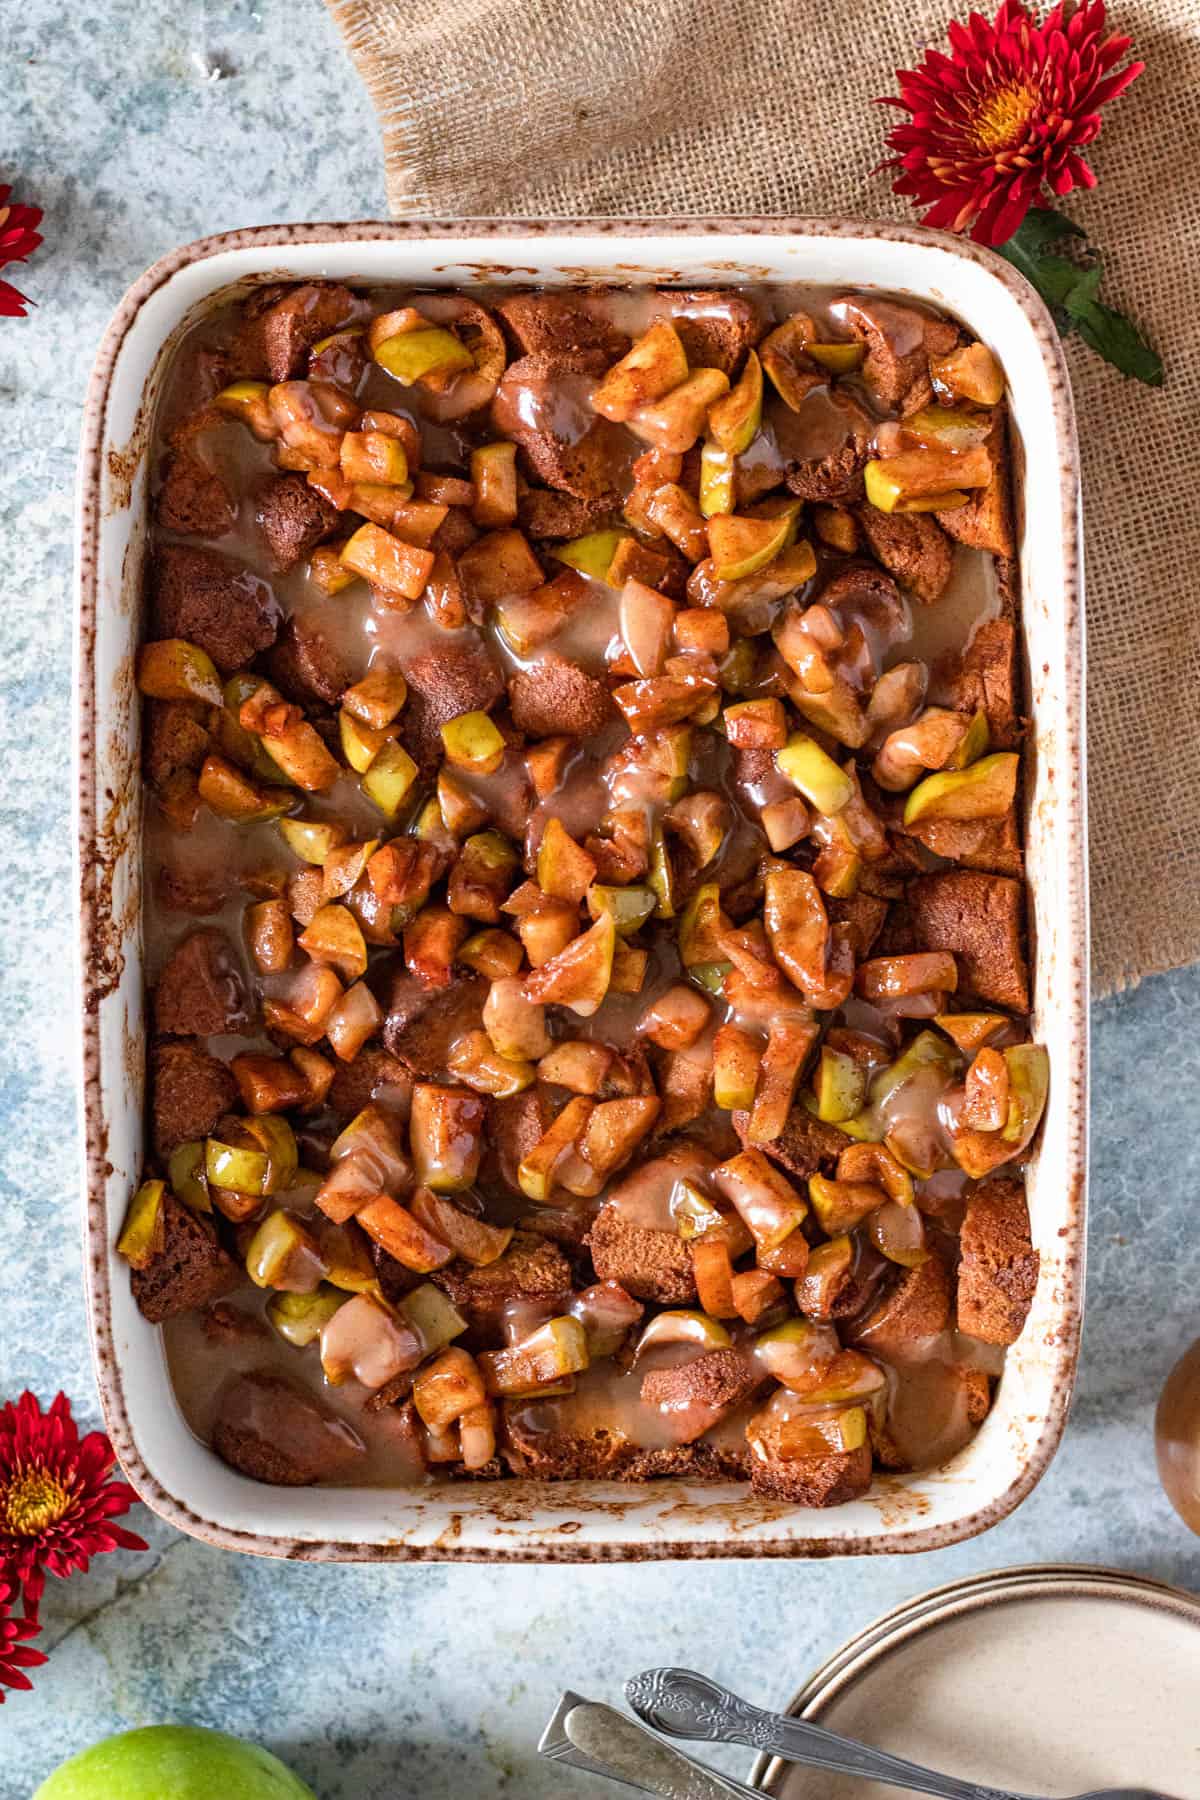 Baked apple cider donut bread pudding with apples and vanilla sauce